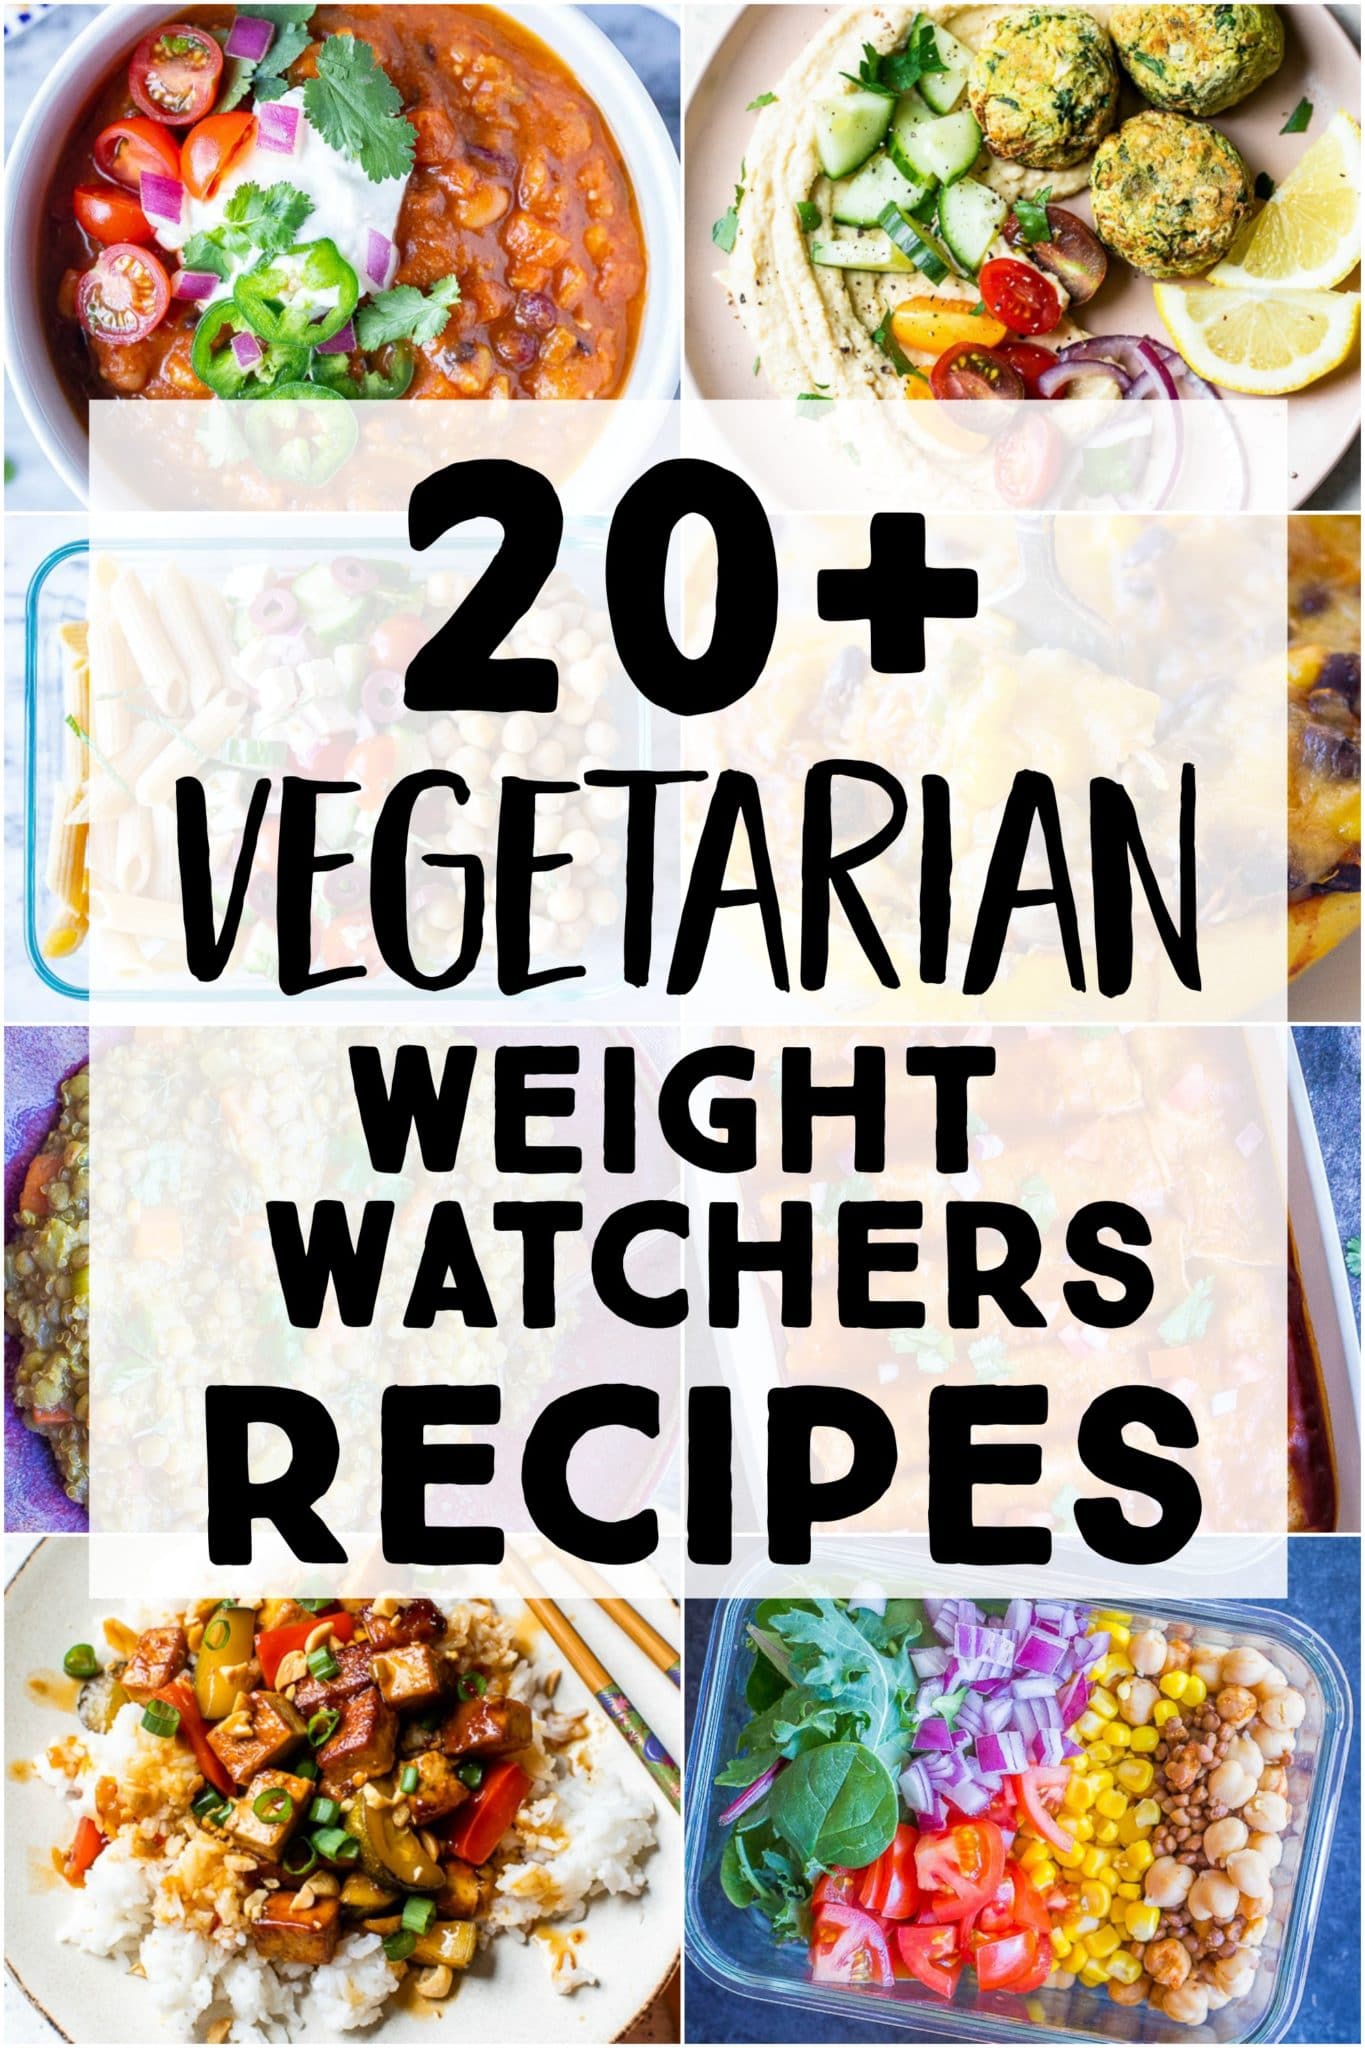 https://www.shelikesfood.com/wp-content/uploads/2020/02/weight-watchers-recipes-scaled.jpg